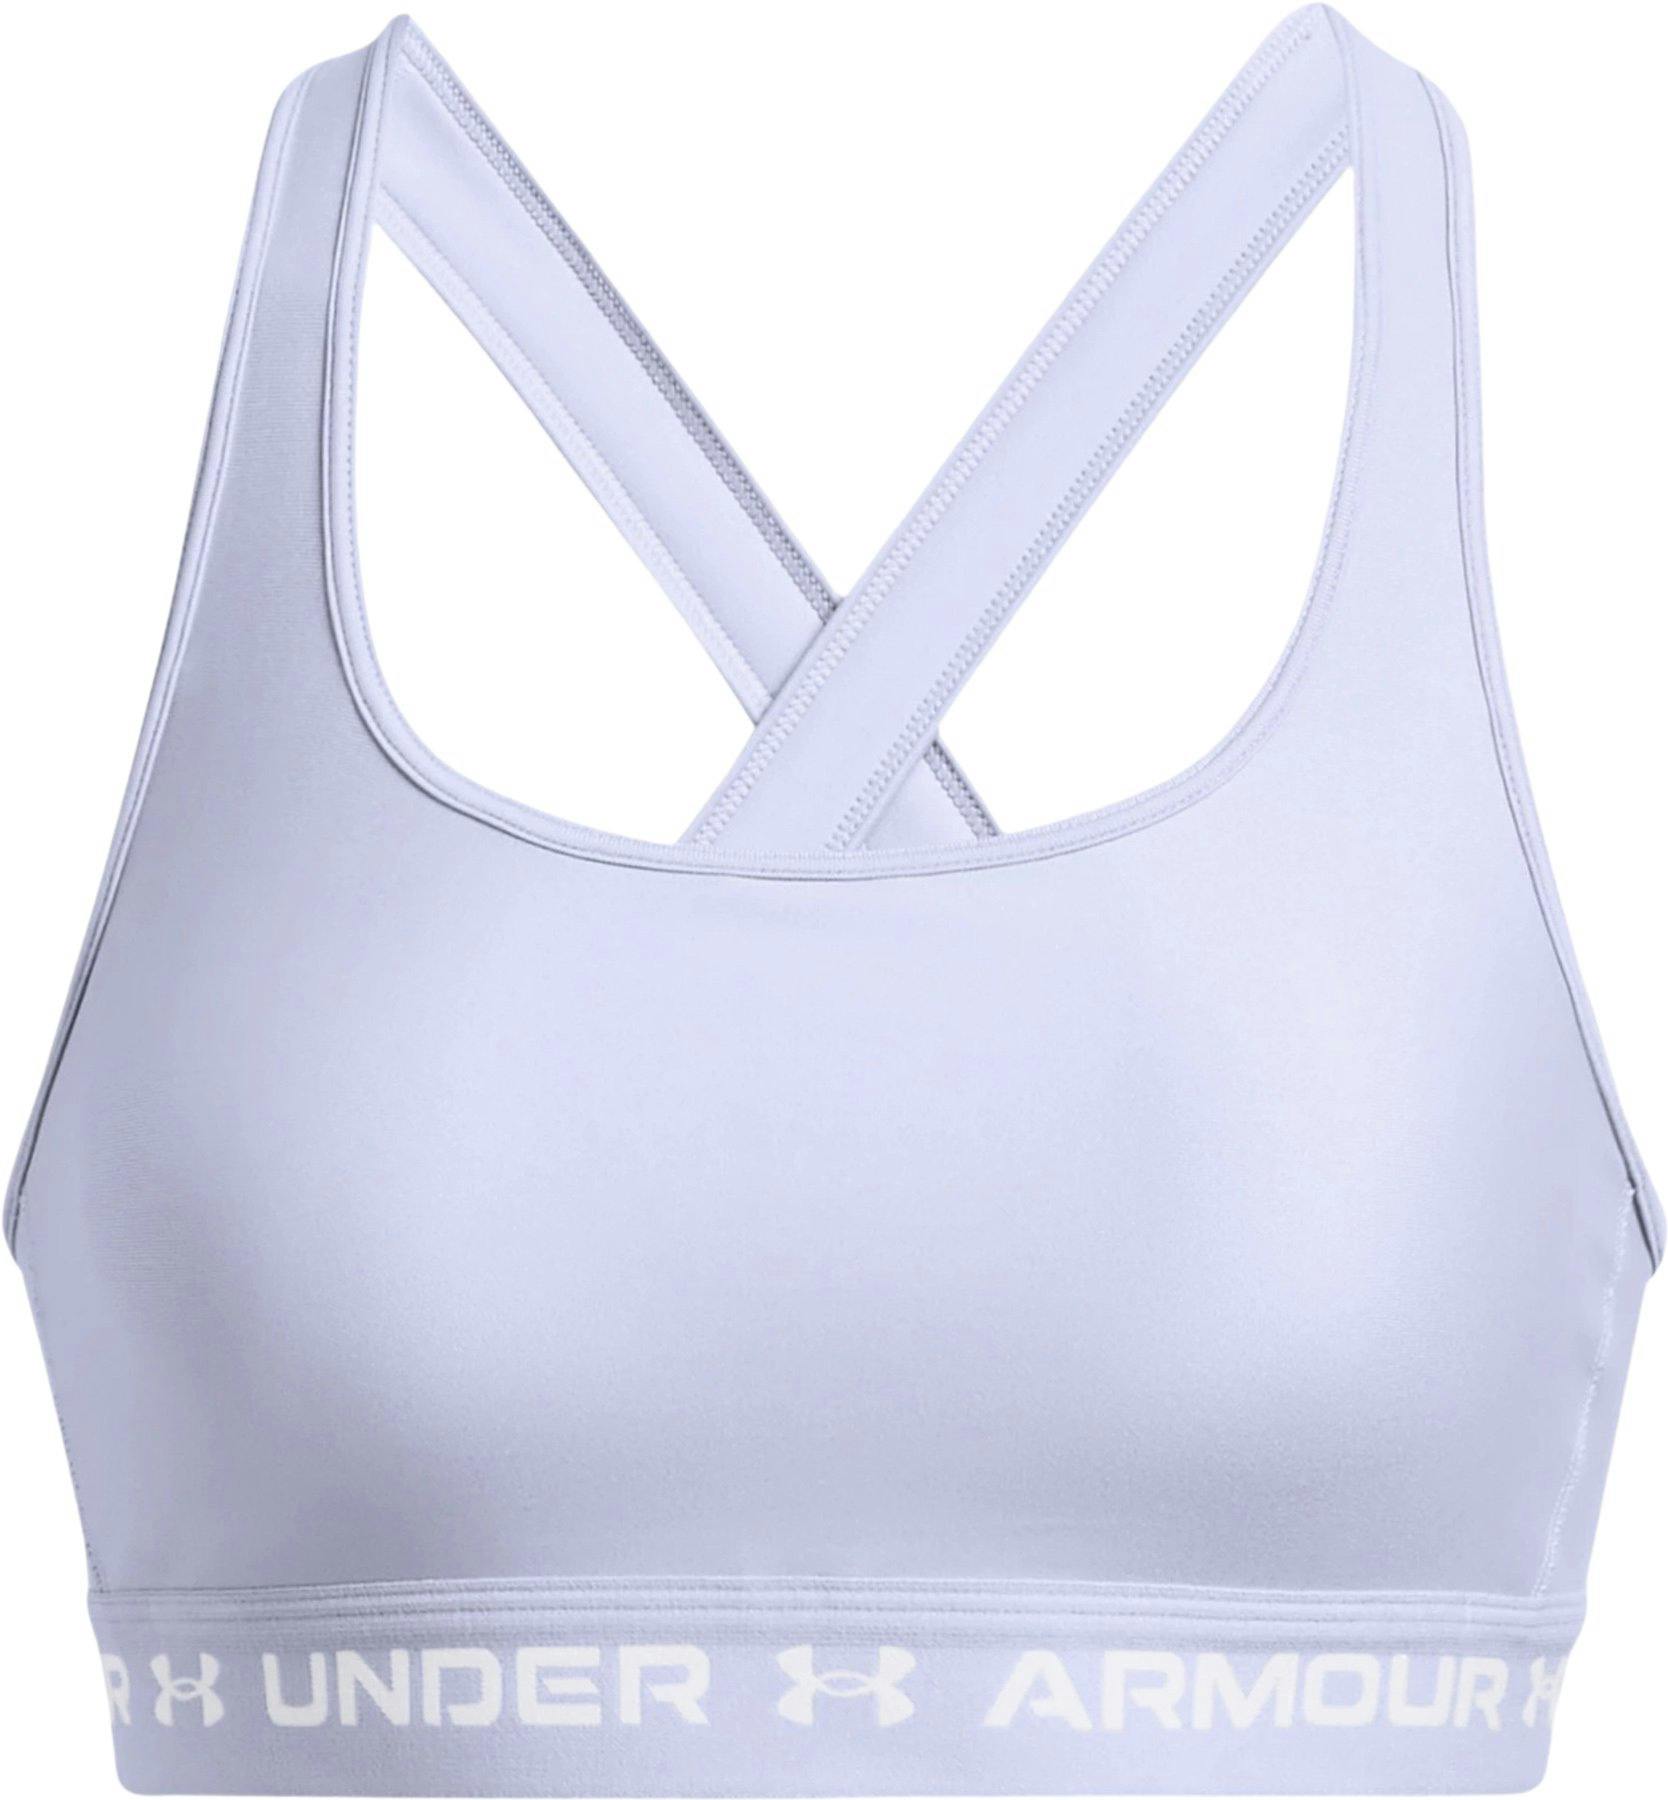 Product image for Crossback Mid Bra - Women's